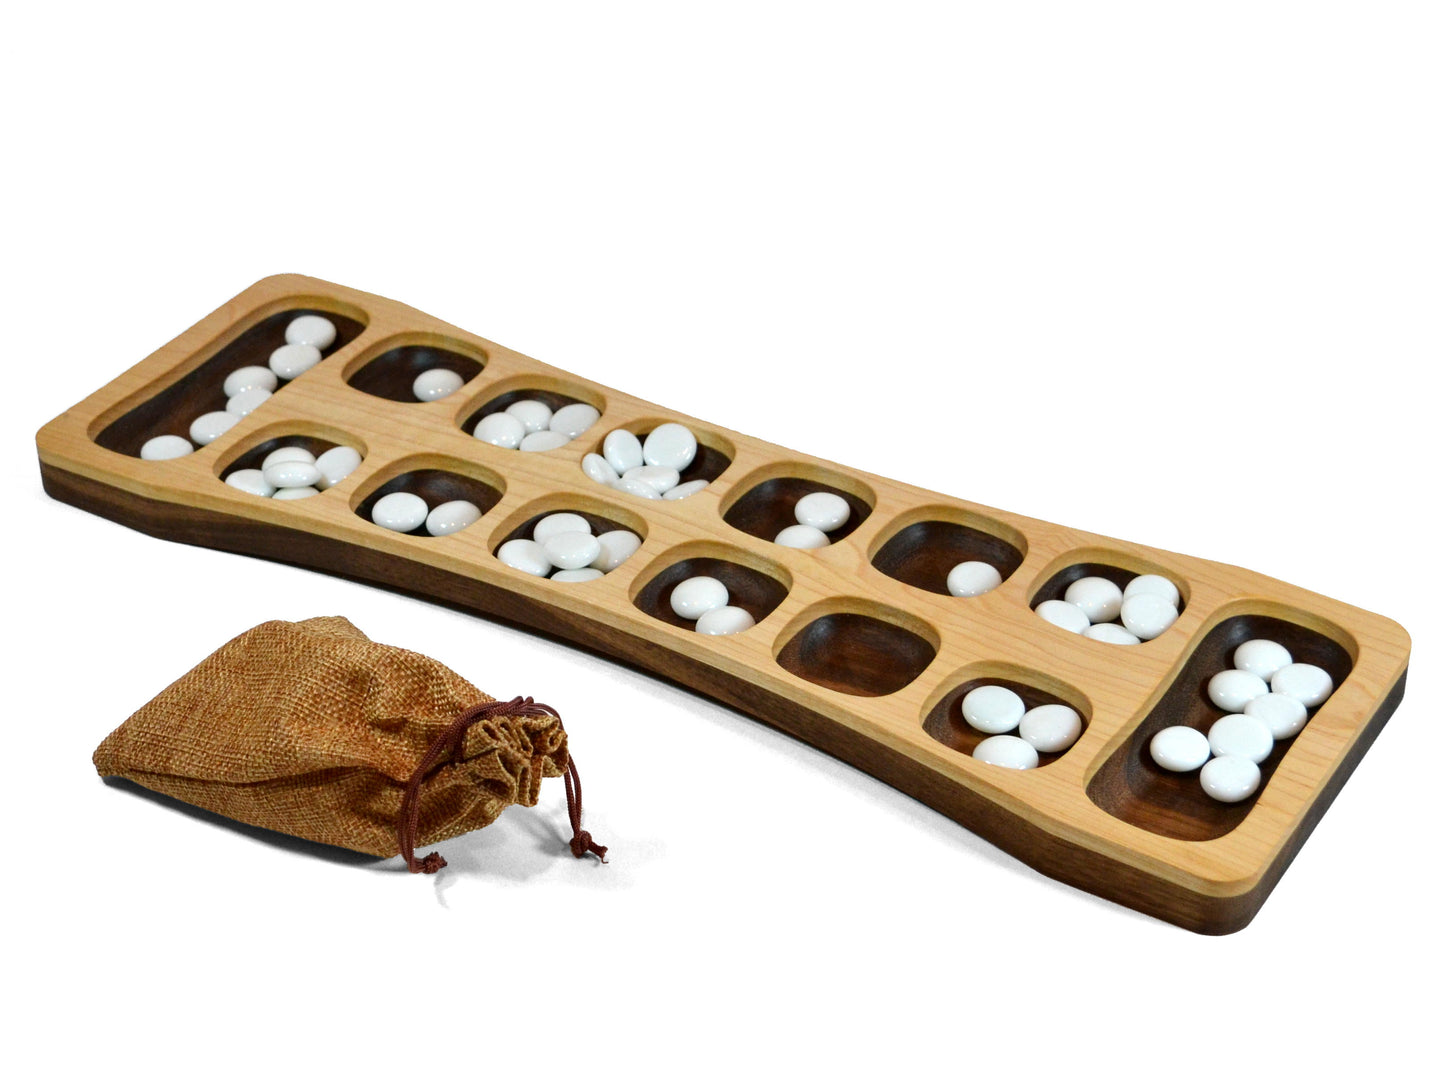 wooden mancala set, curvy handcrafted board with white glass beads